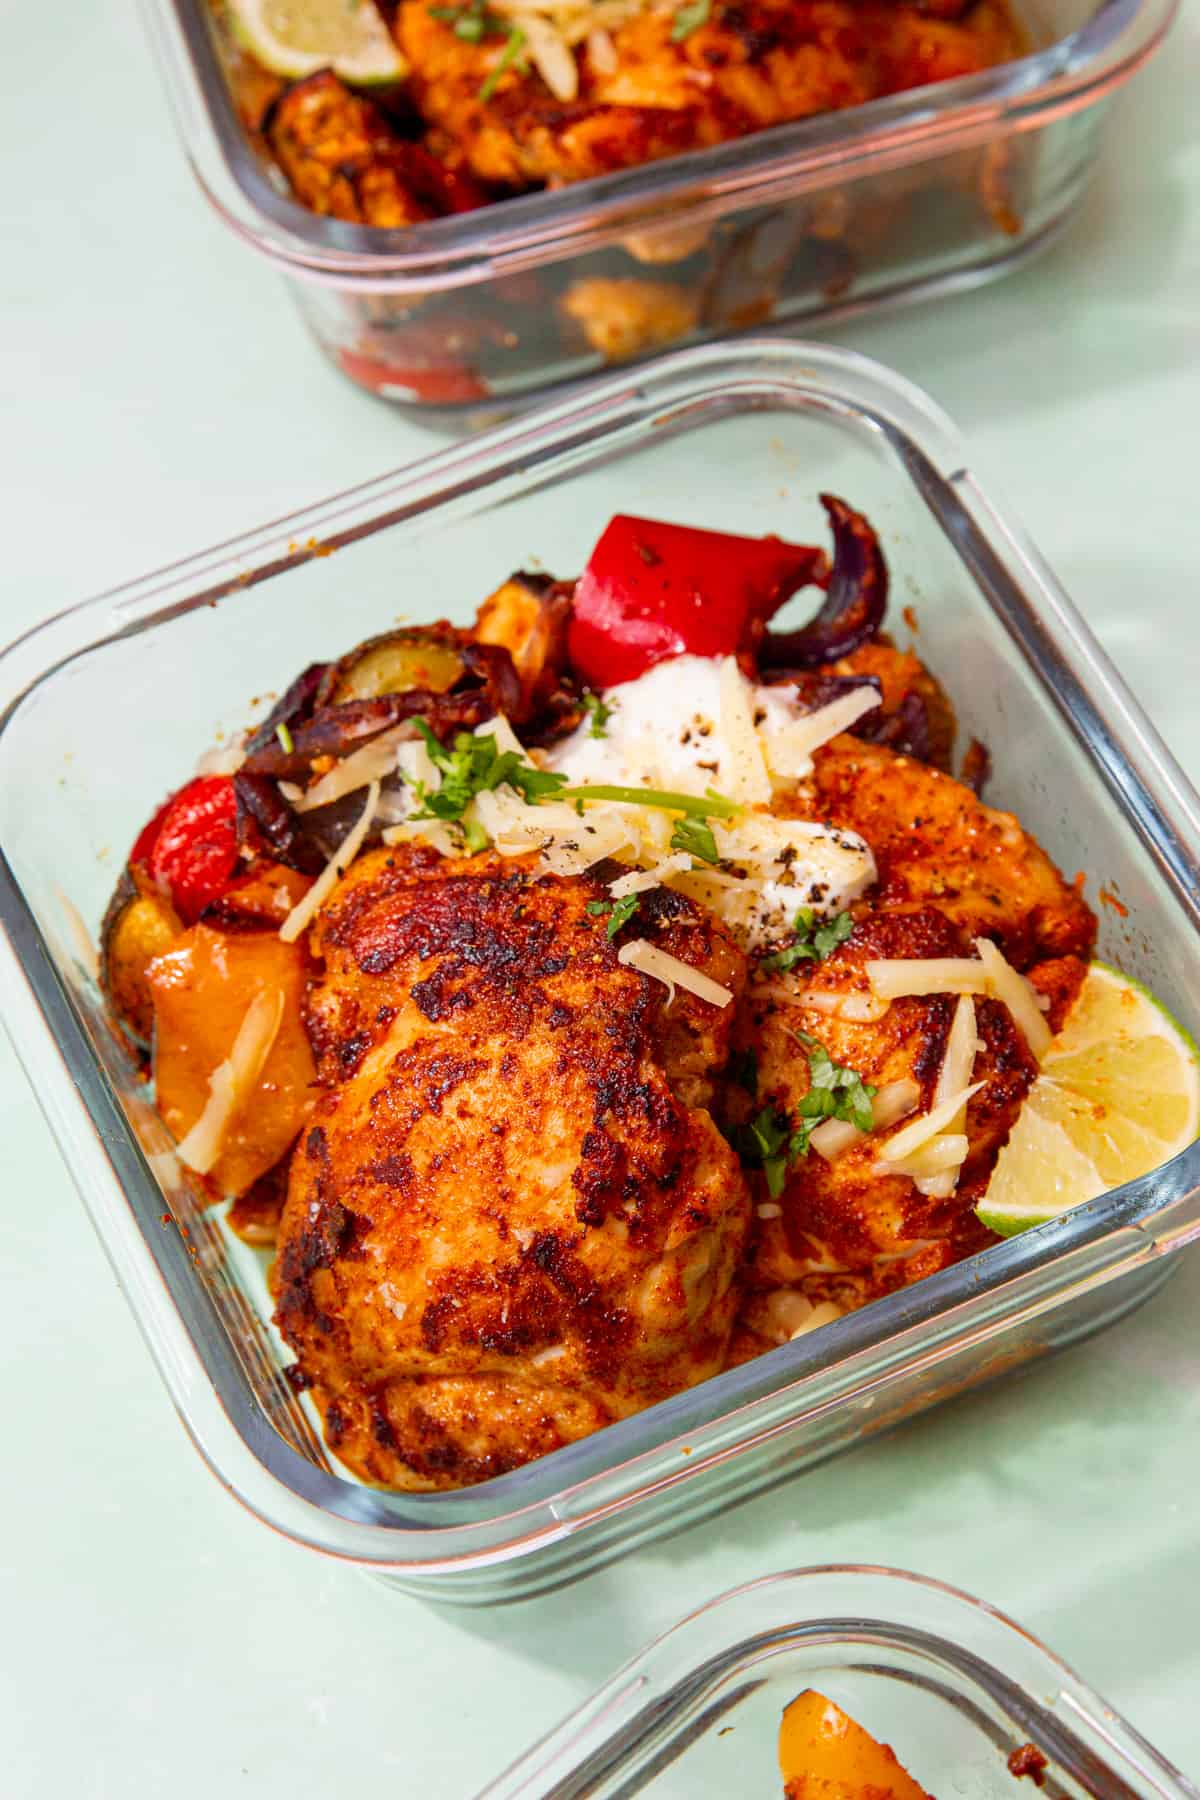 Meal prep containers (square and glass) with roasted chicken, vegetables, sour cream, a wedge of lime and grated cheddar.